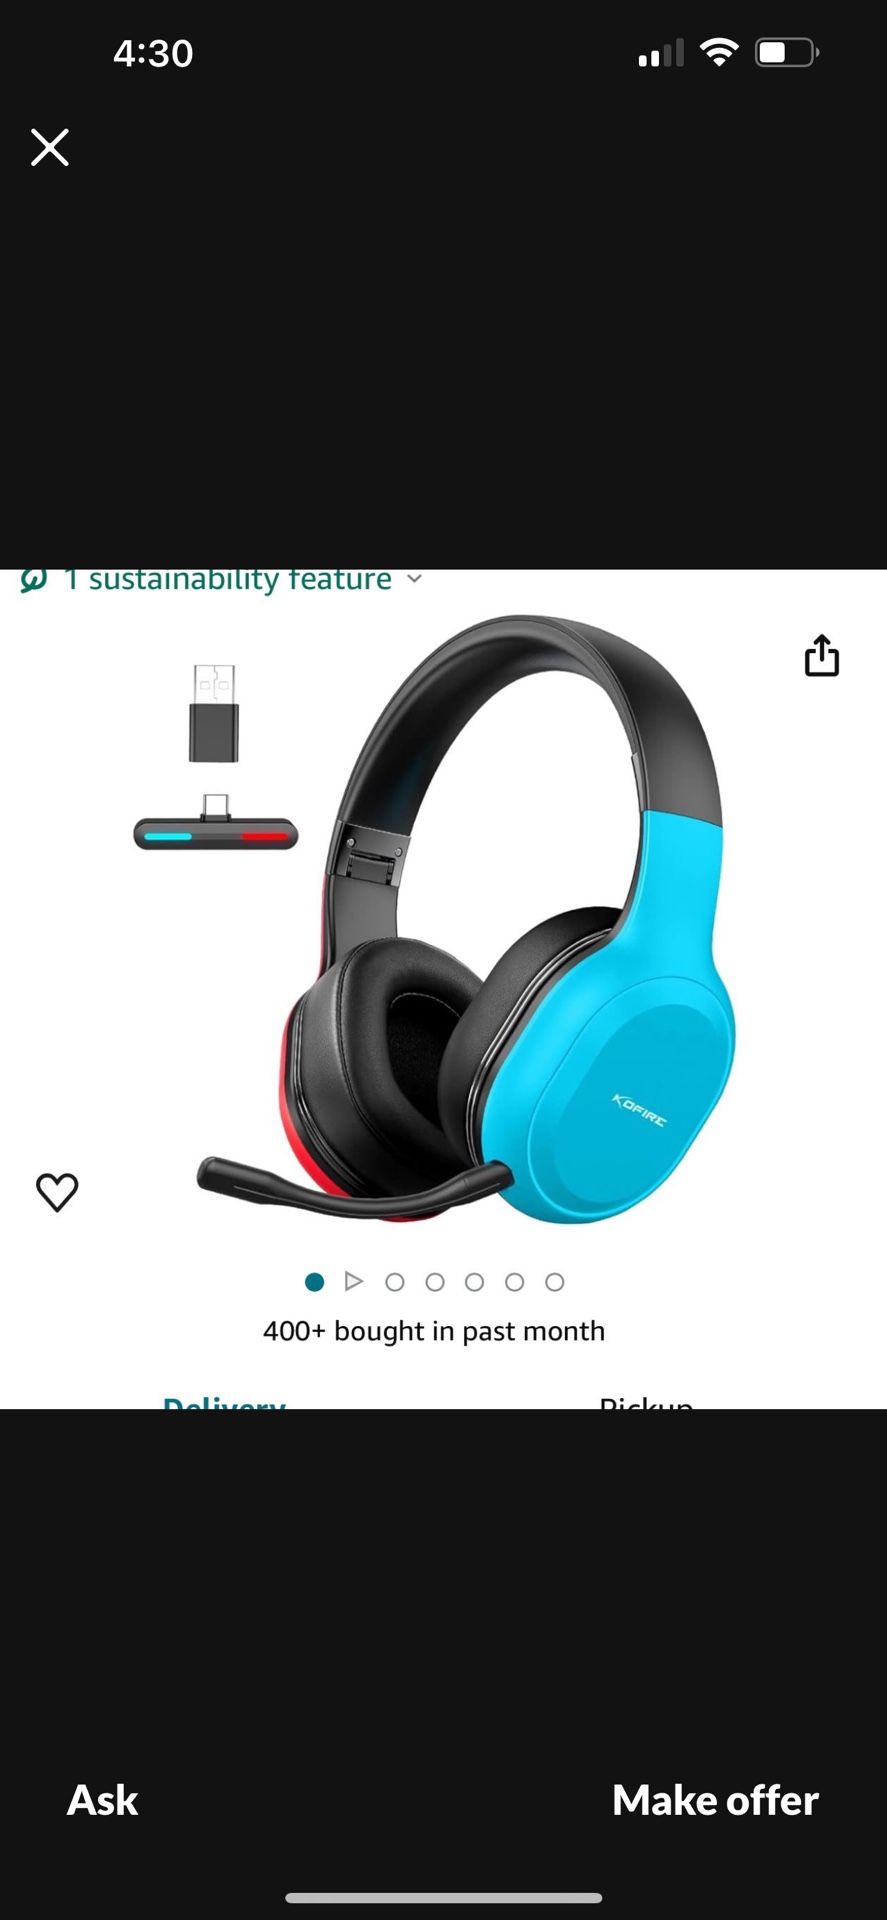 Wireless Gaming Headset For Nintendo 